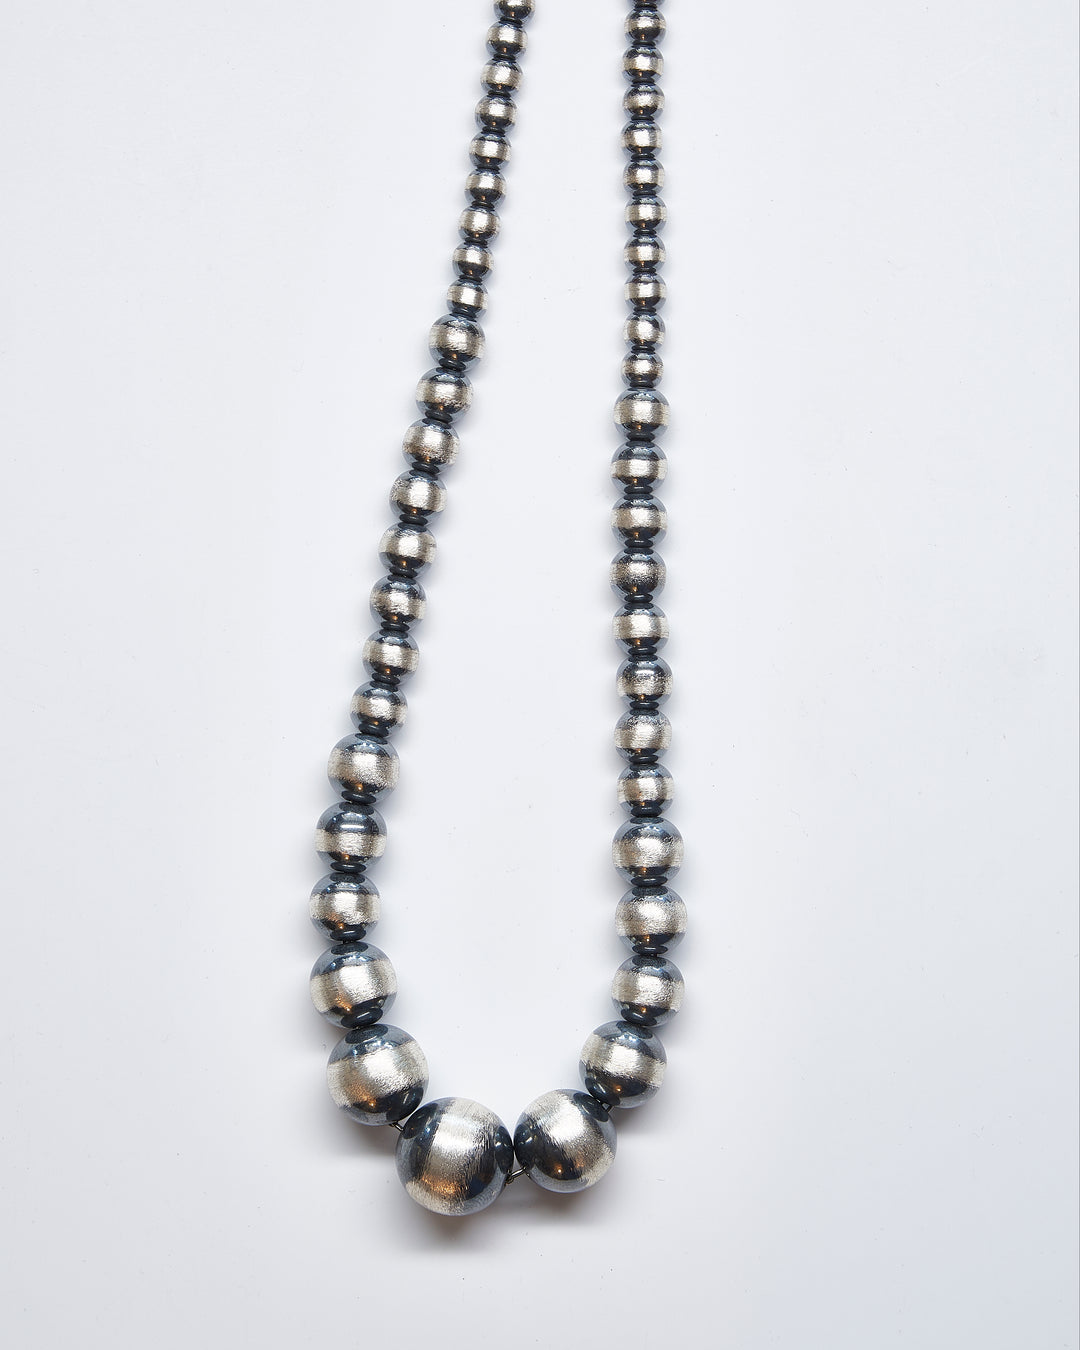 Oxidized Silver Bead Necklace 